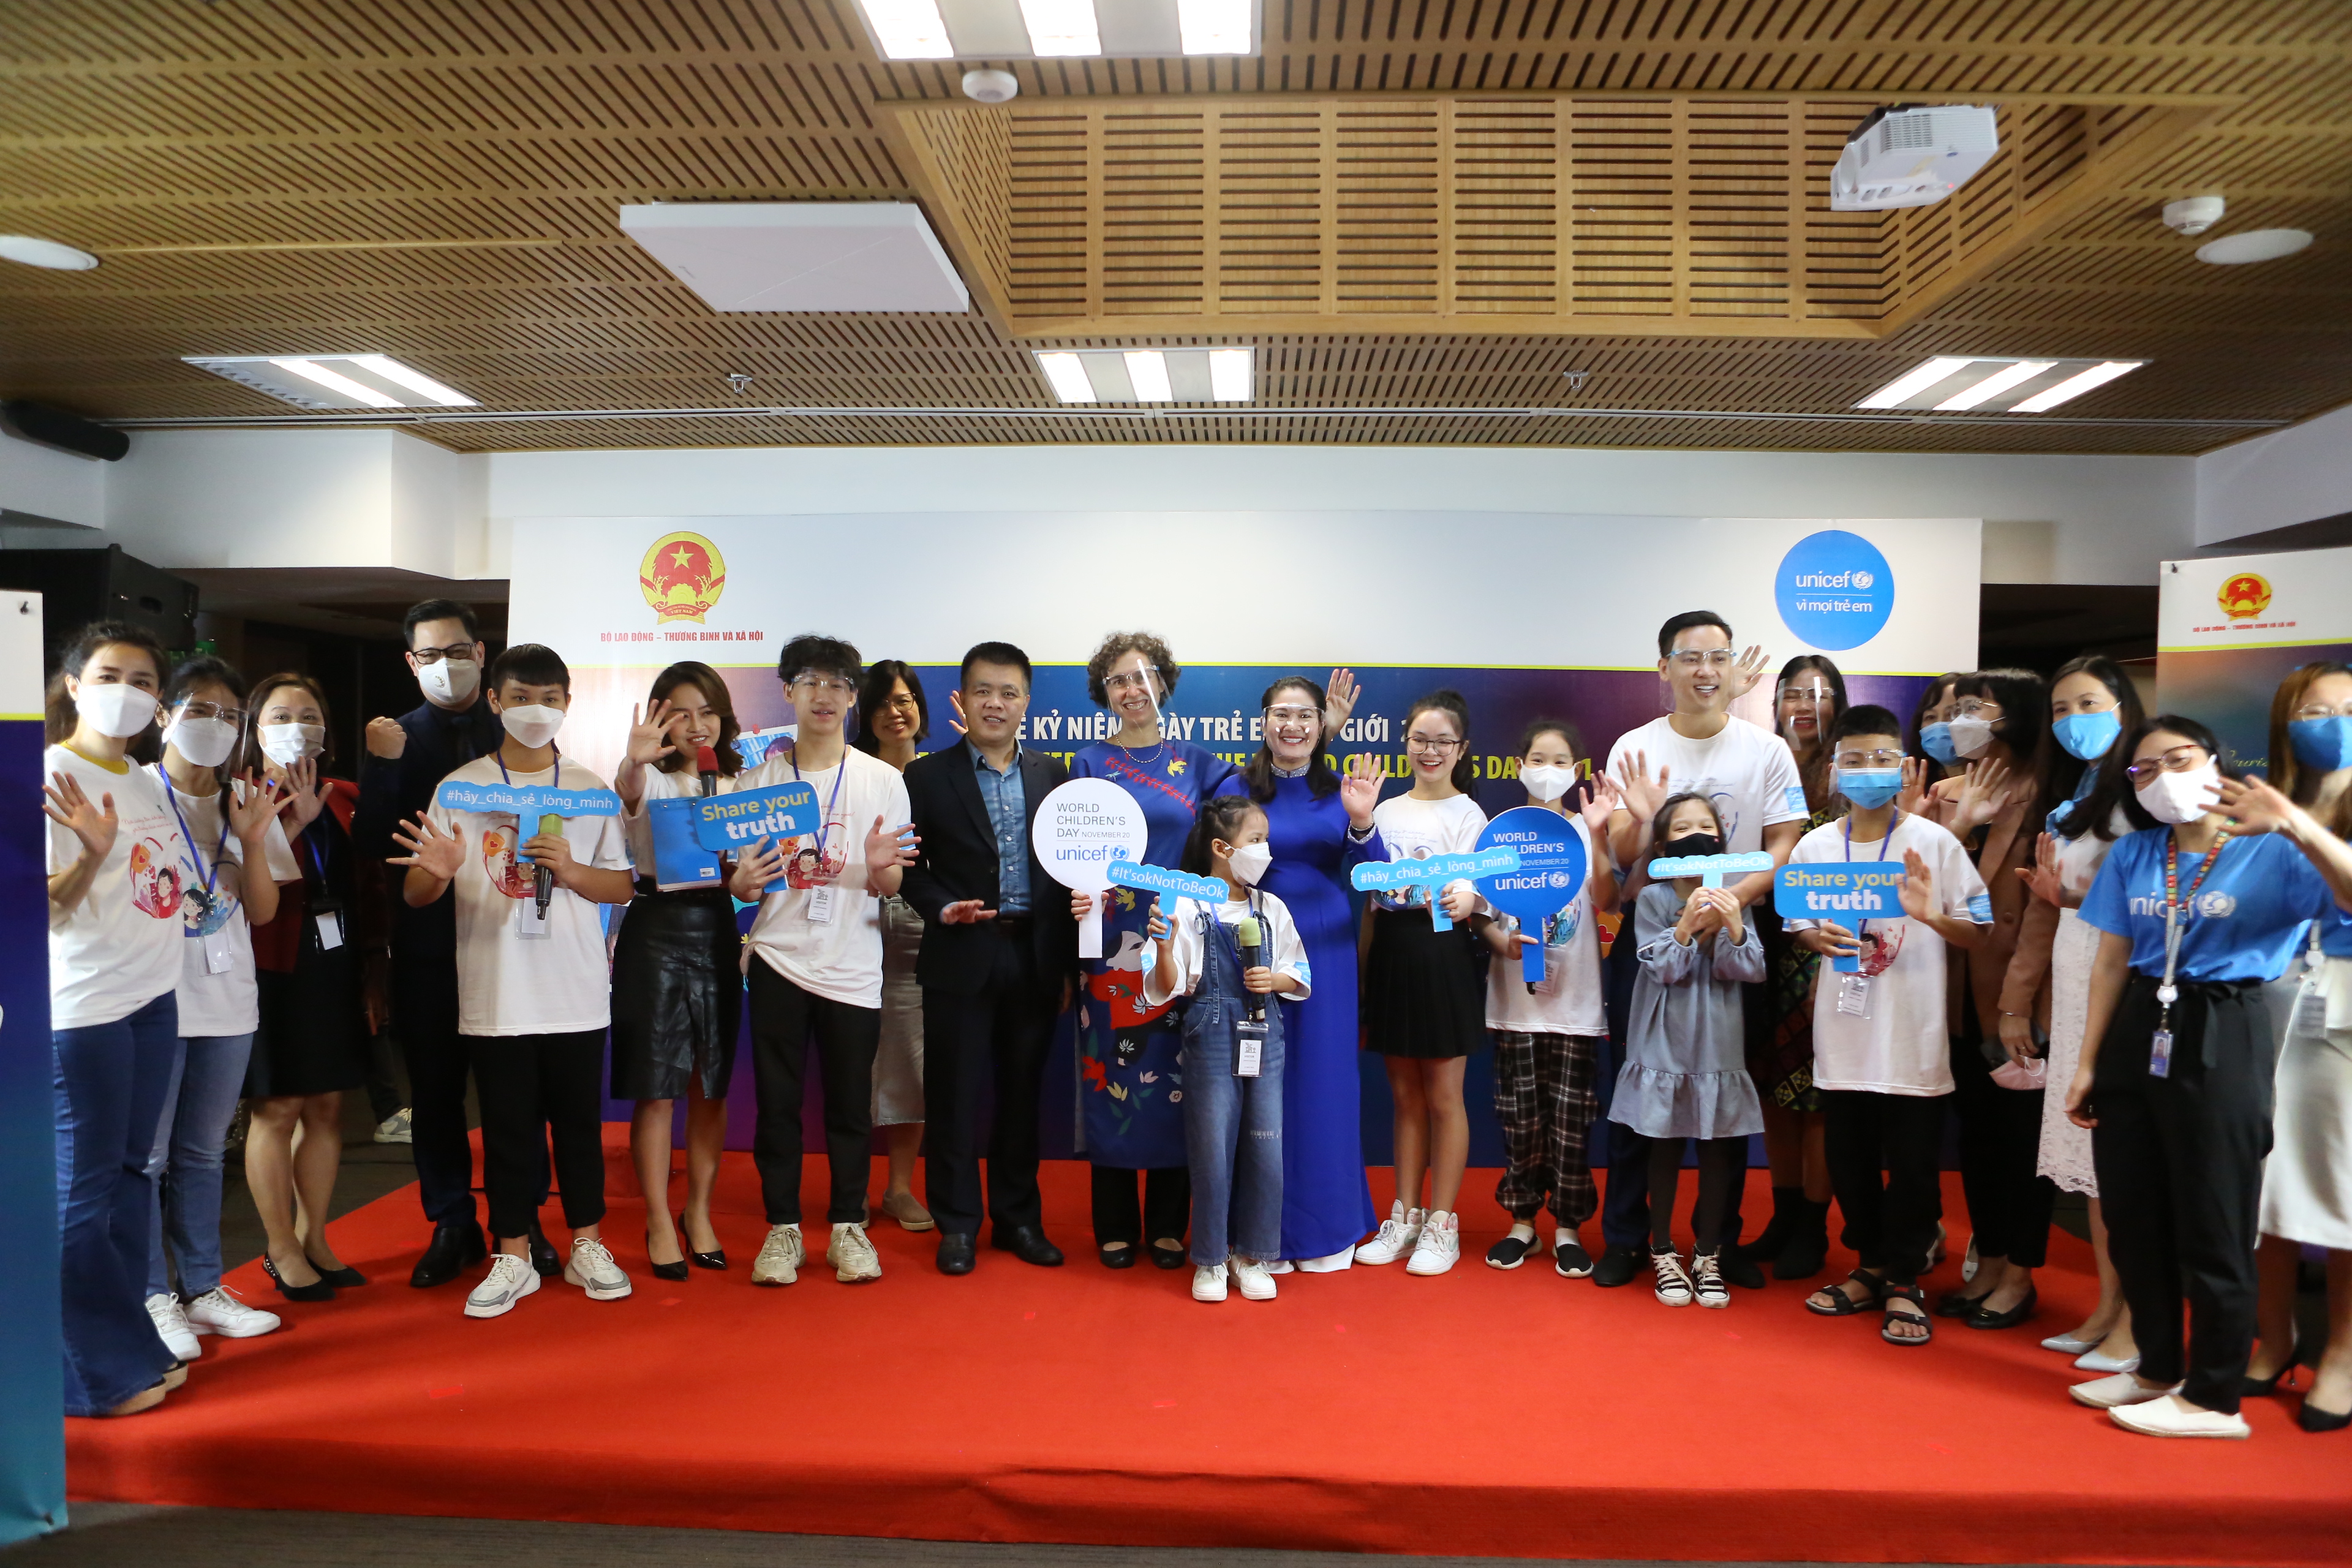 This supplied photo shows children and delegates at an event to celebrate World Children’s Day in Hanoi, Vietnam, November 17, 2021.